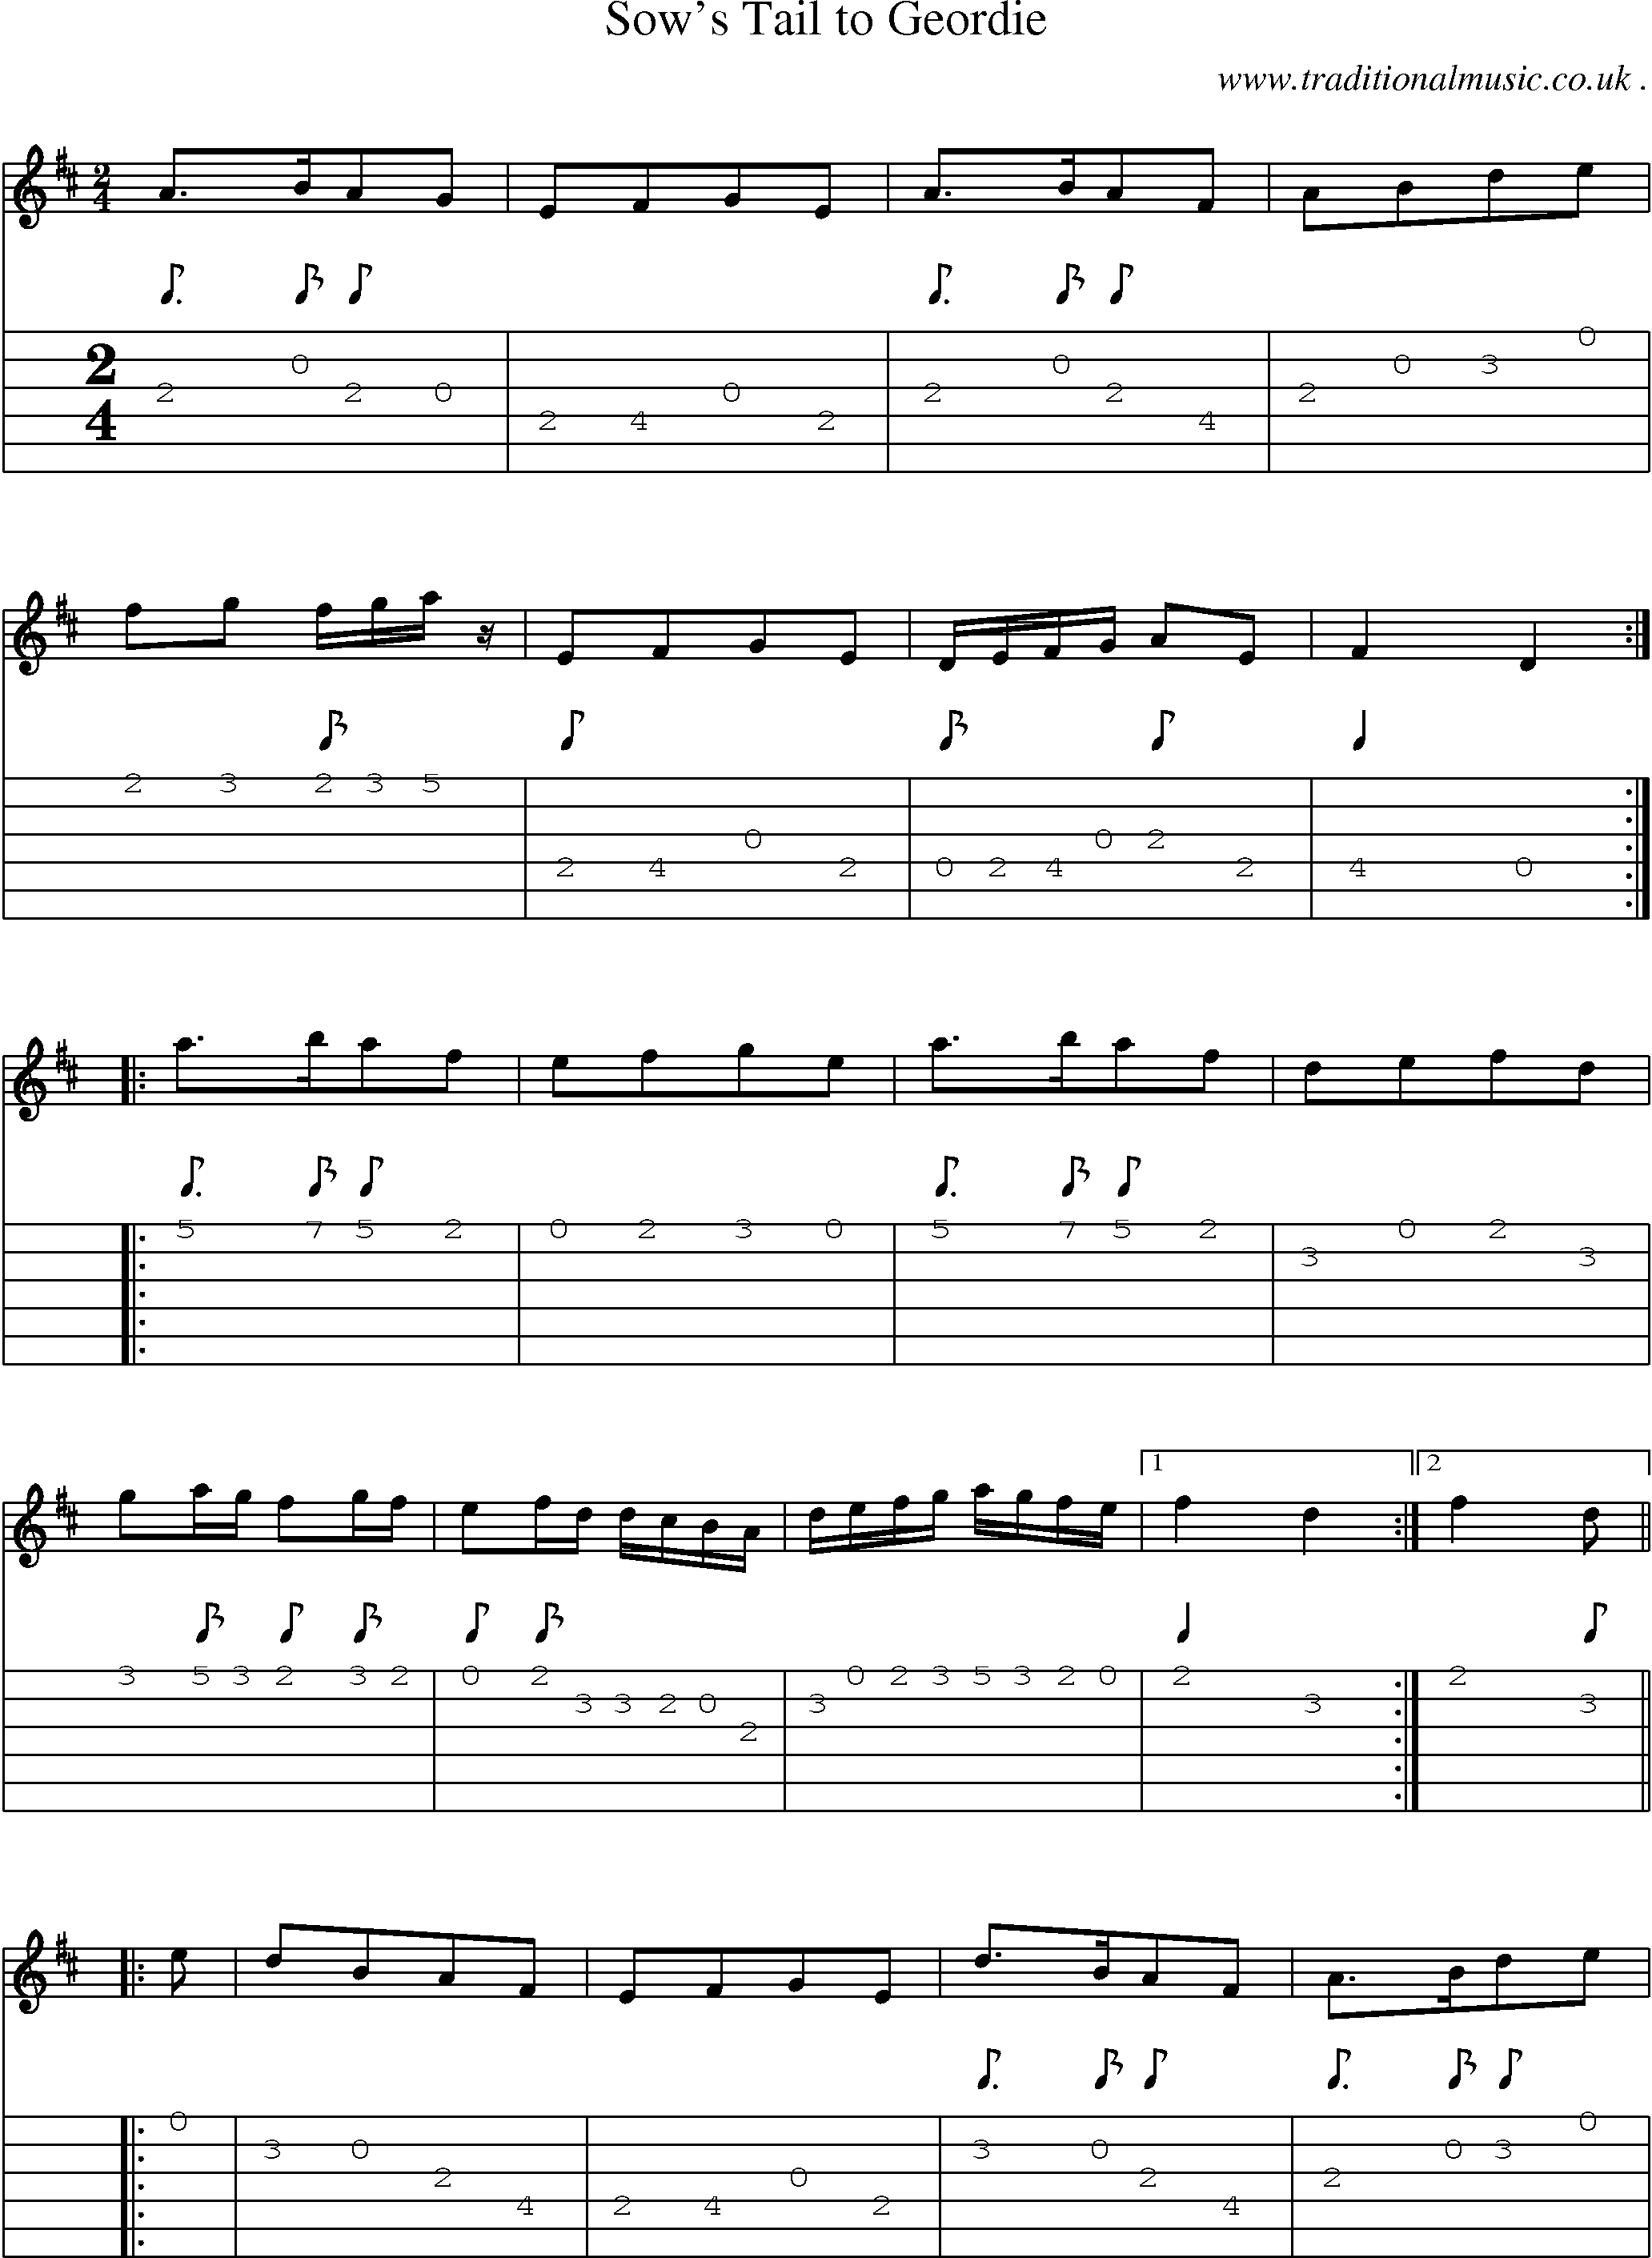 Sheet-Music and Guitar Tabs for Sows Tail To Geordie